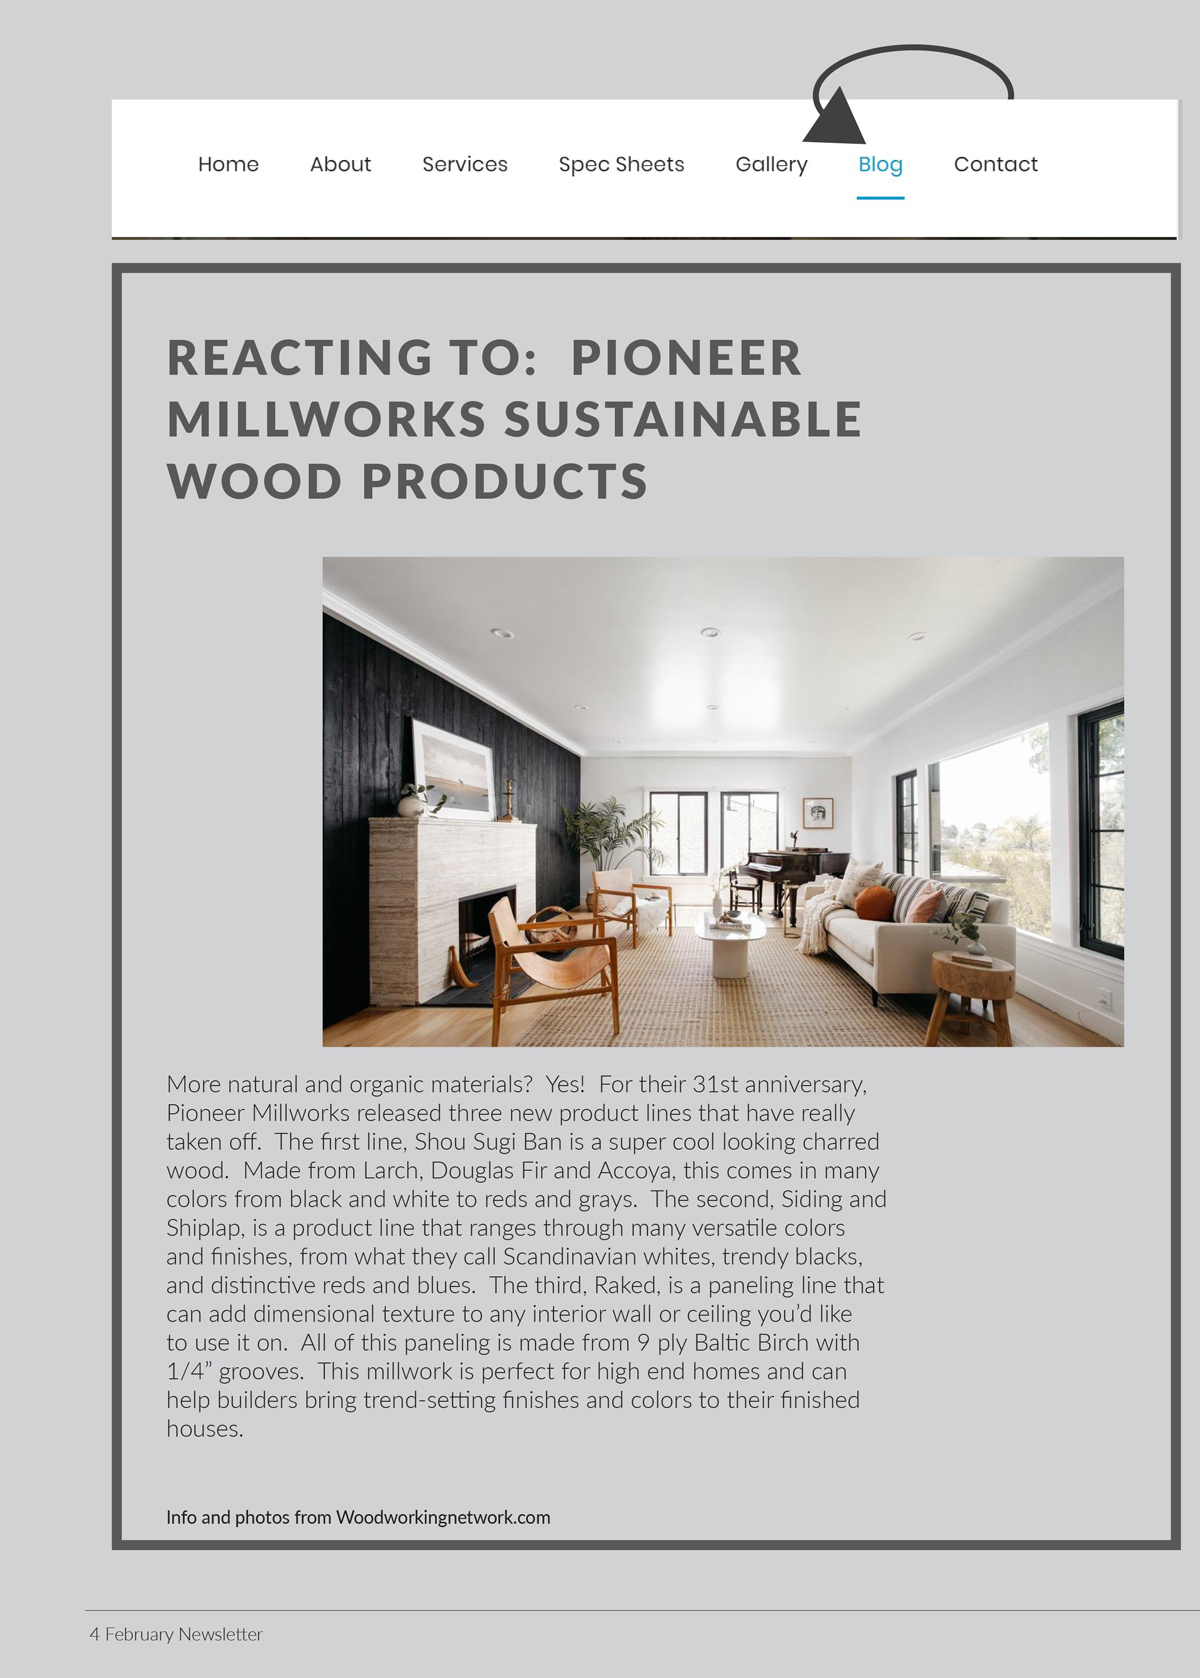 Reacting to: Pioneer Millworks sustainable products.